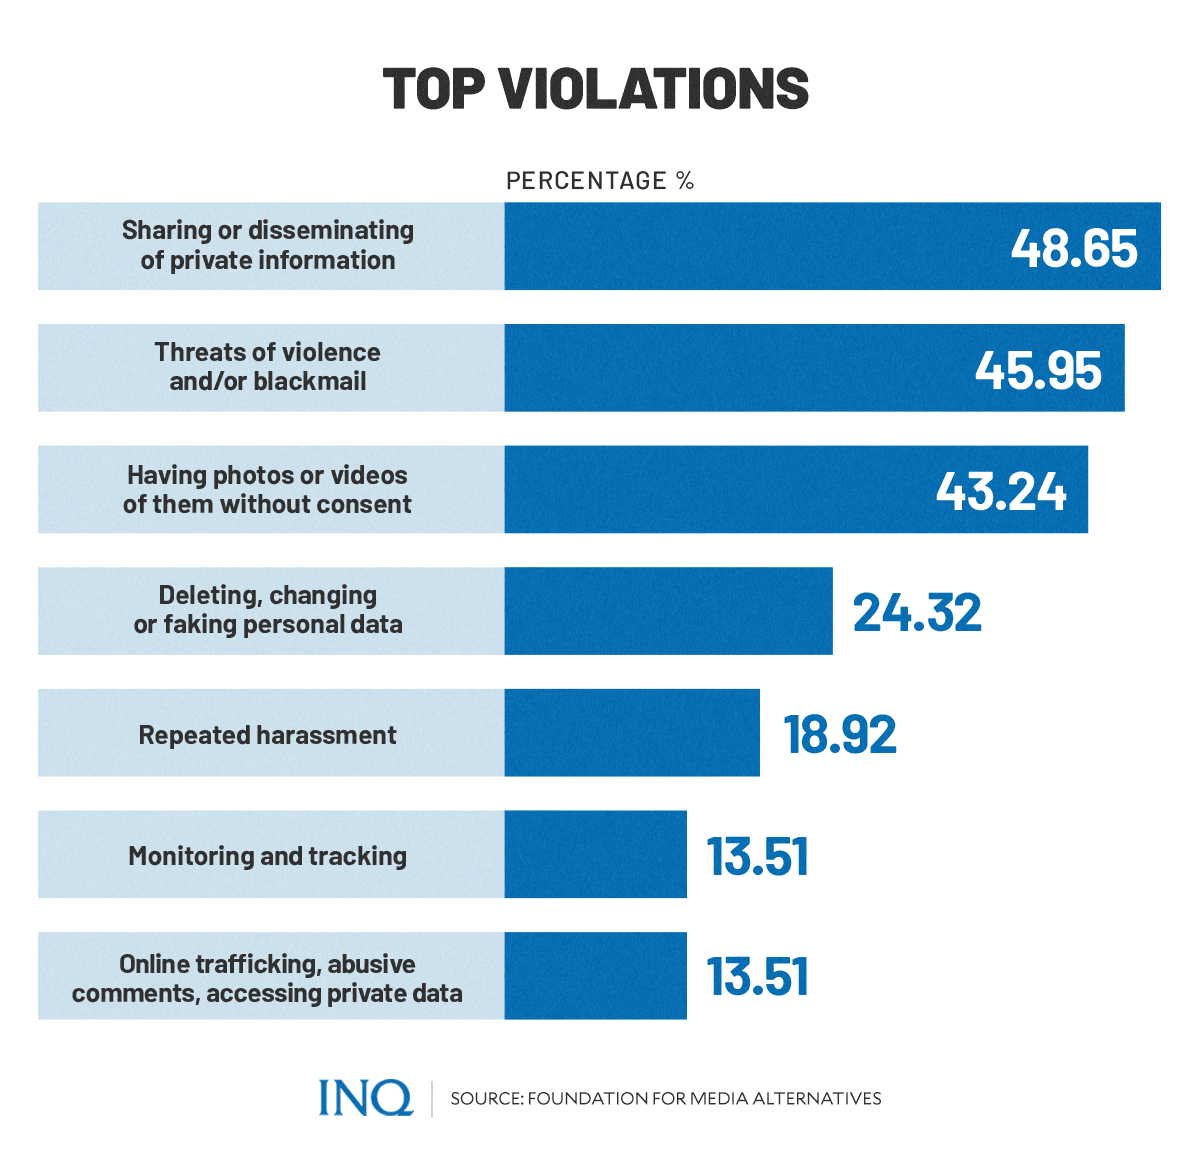 Top violations of harassment